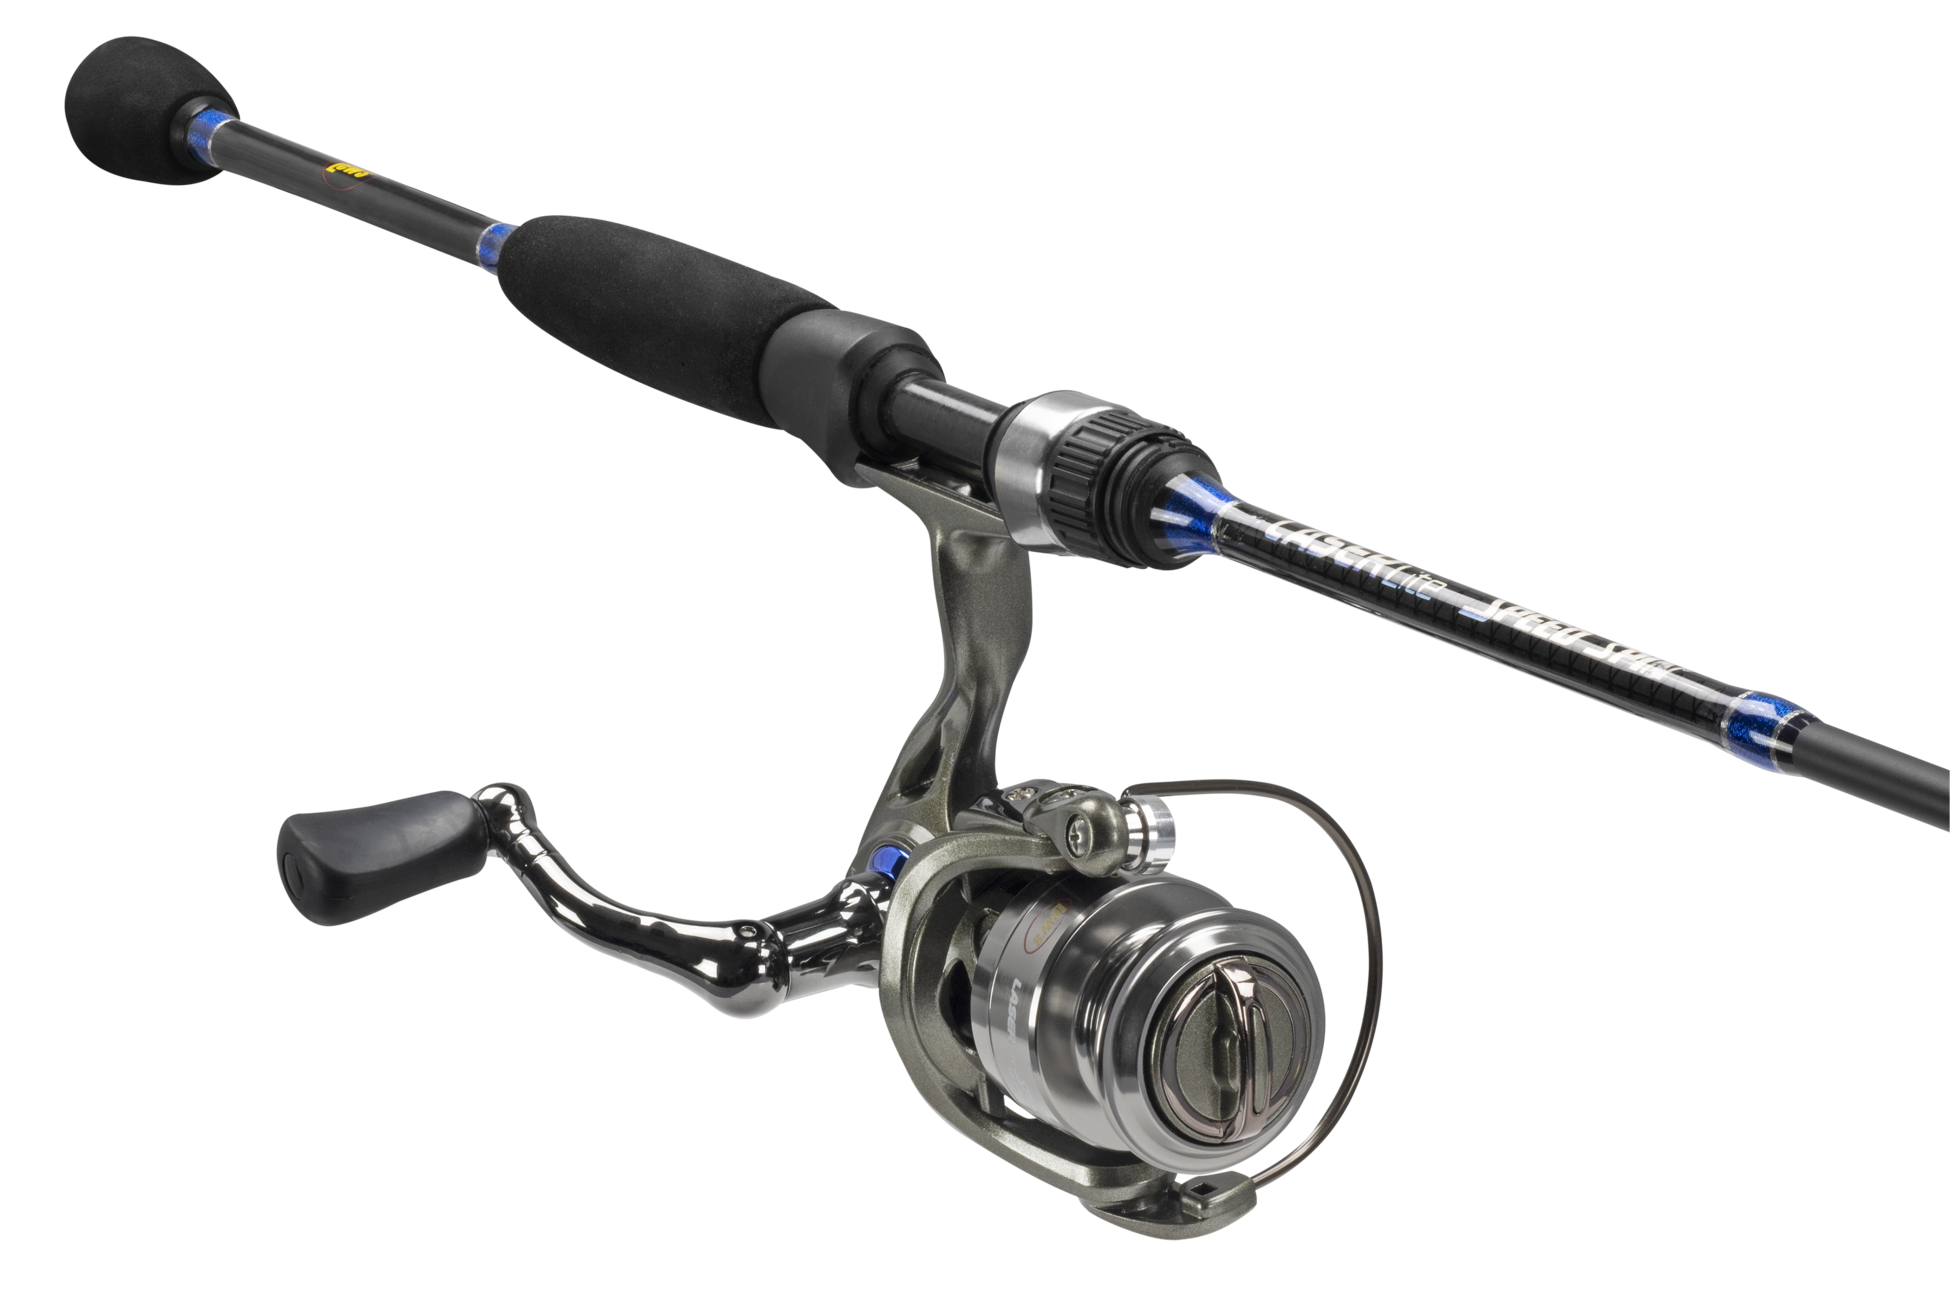 13 Fishing Rod Reel Combos - Casting Fishing Combos 5 Section